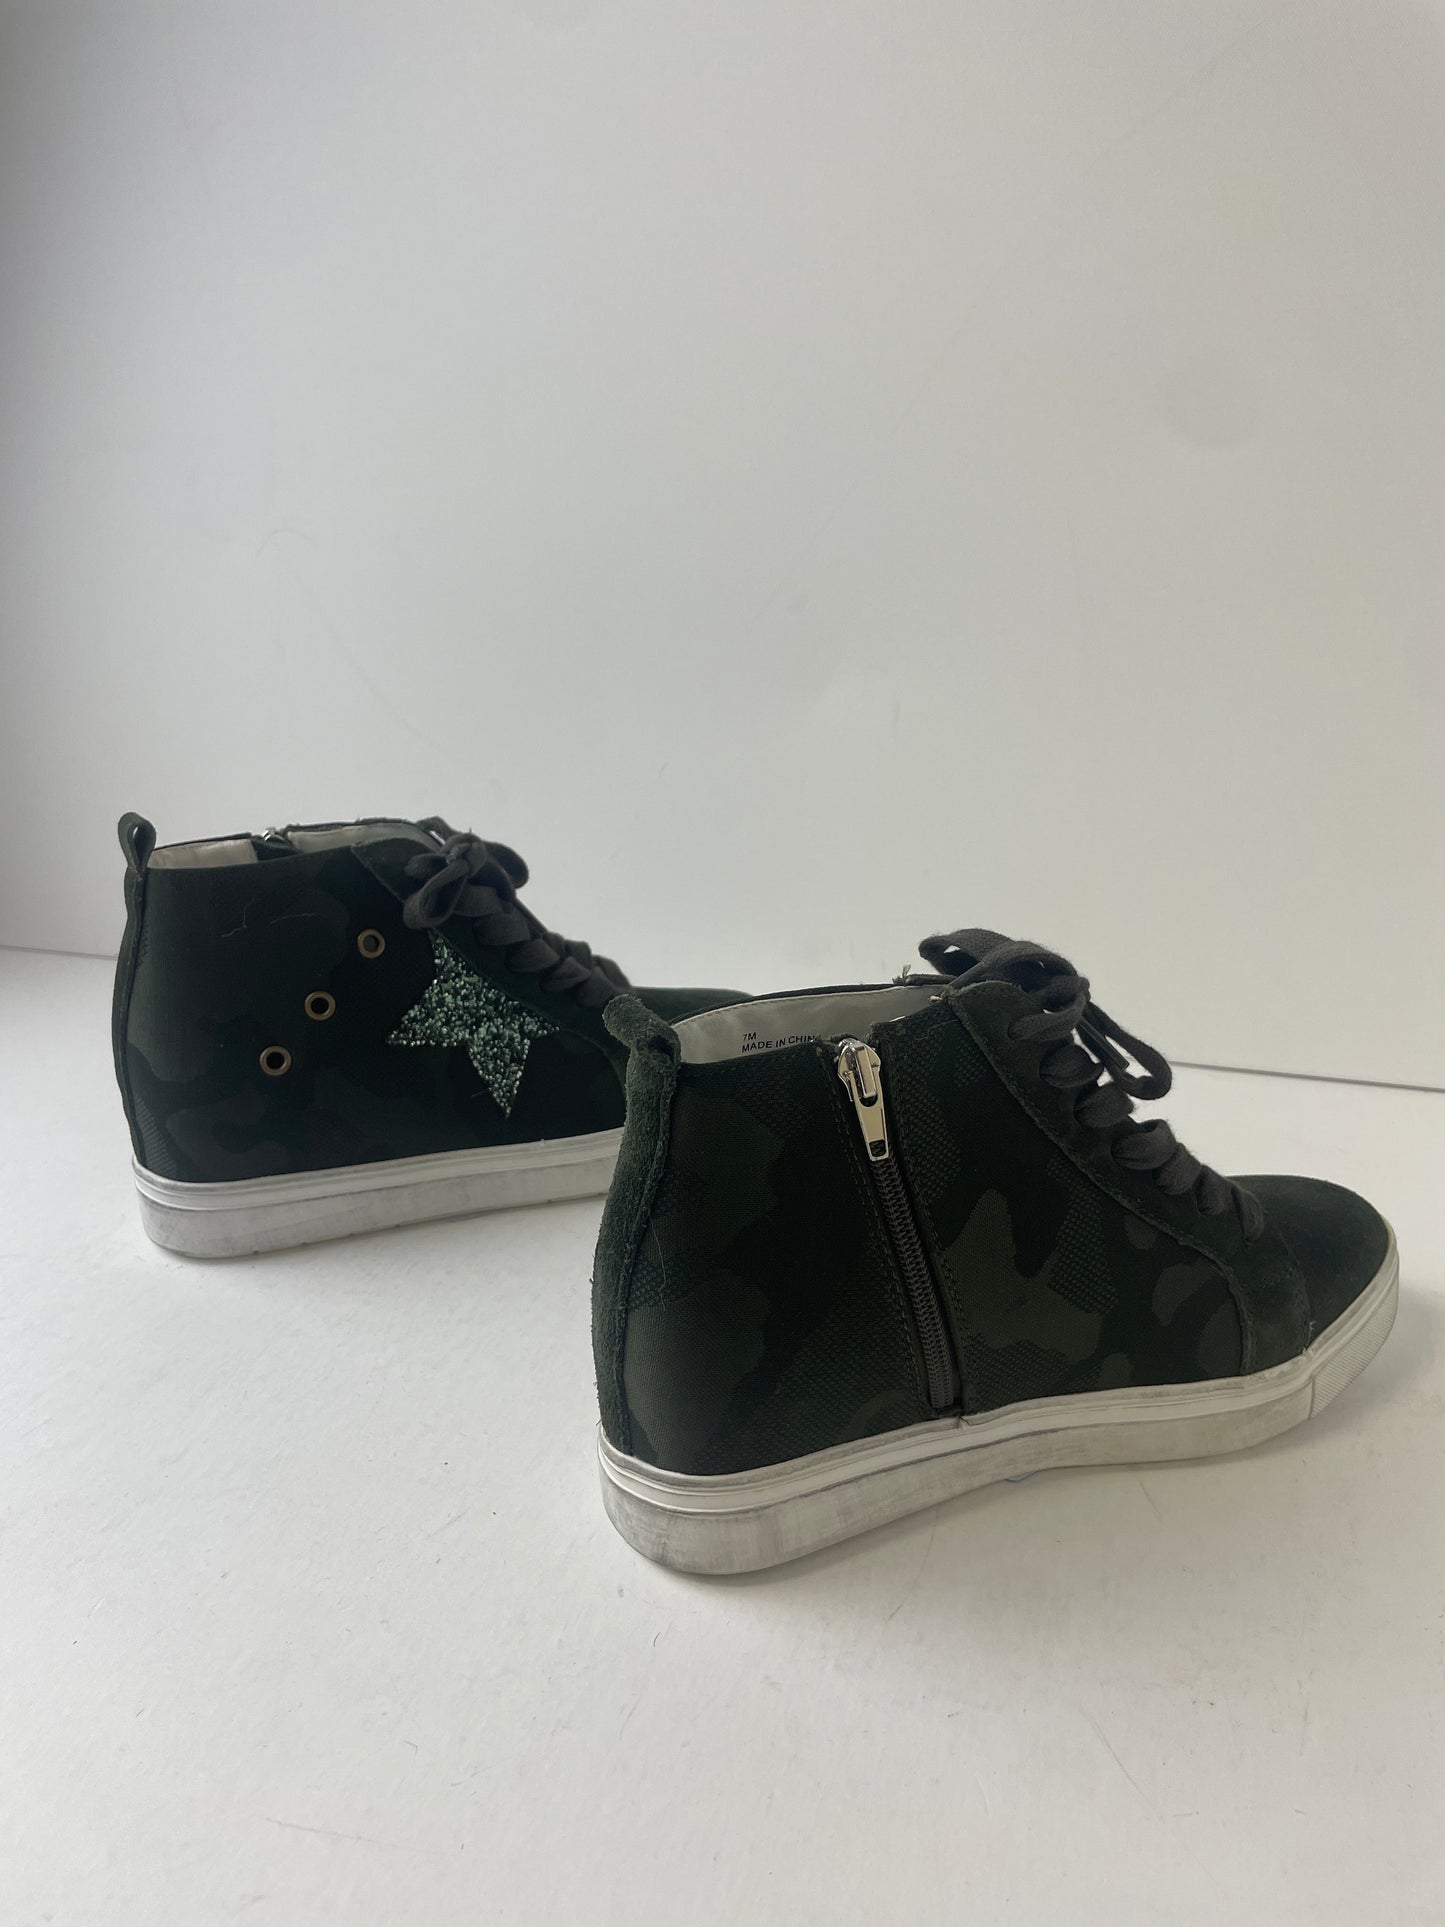 Shoes Sneakers By Steve Madden  Size: 7